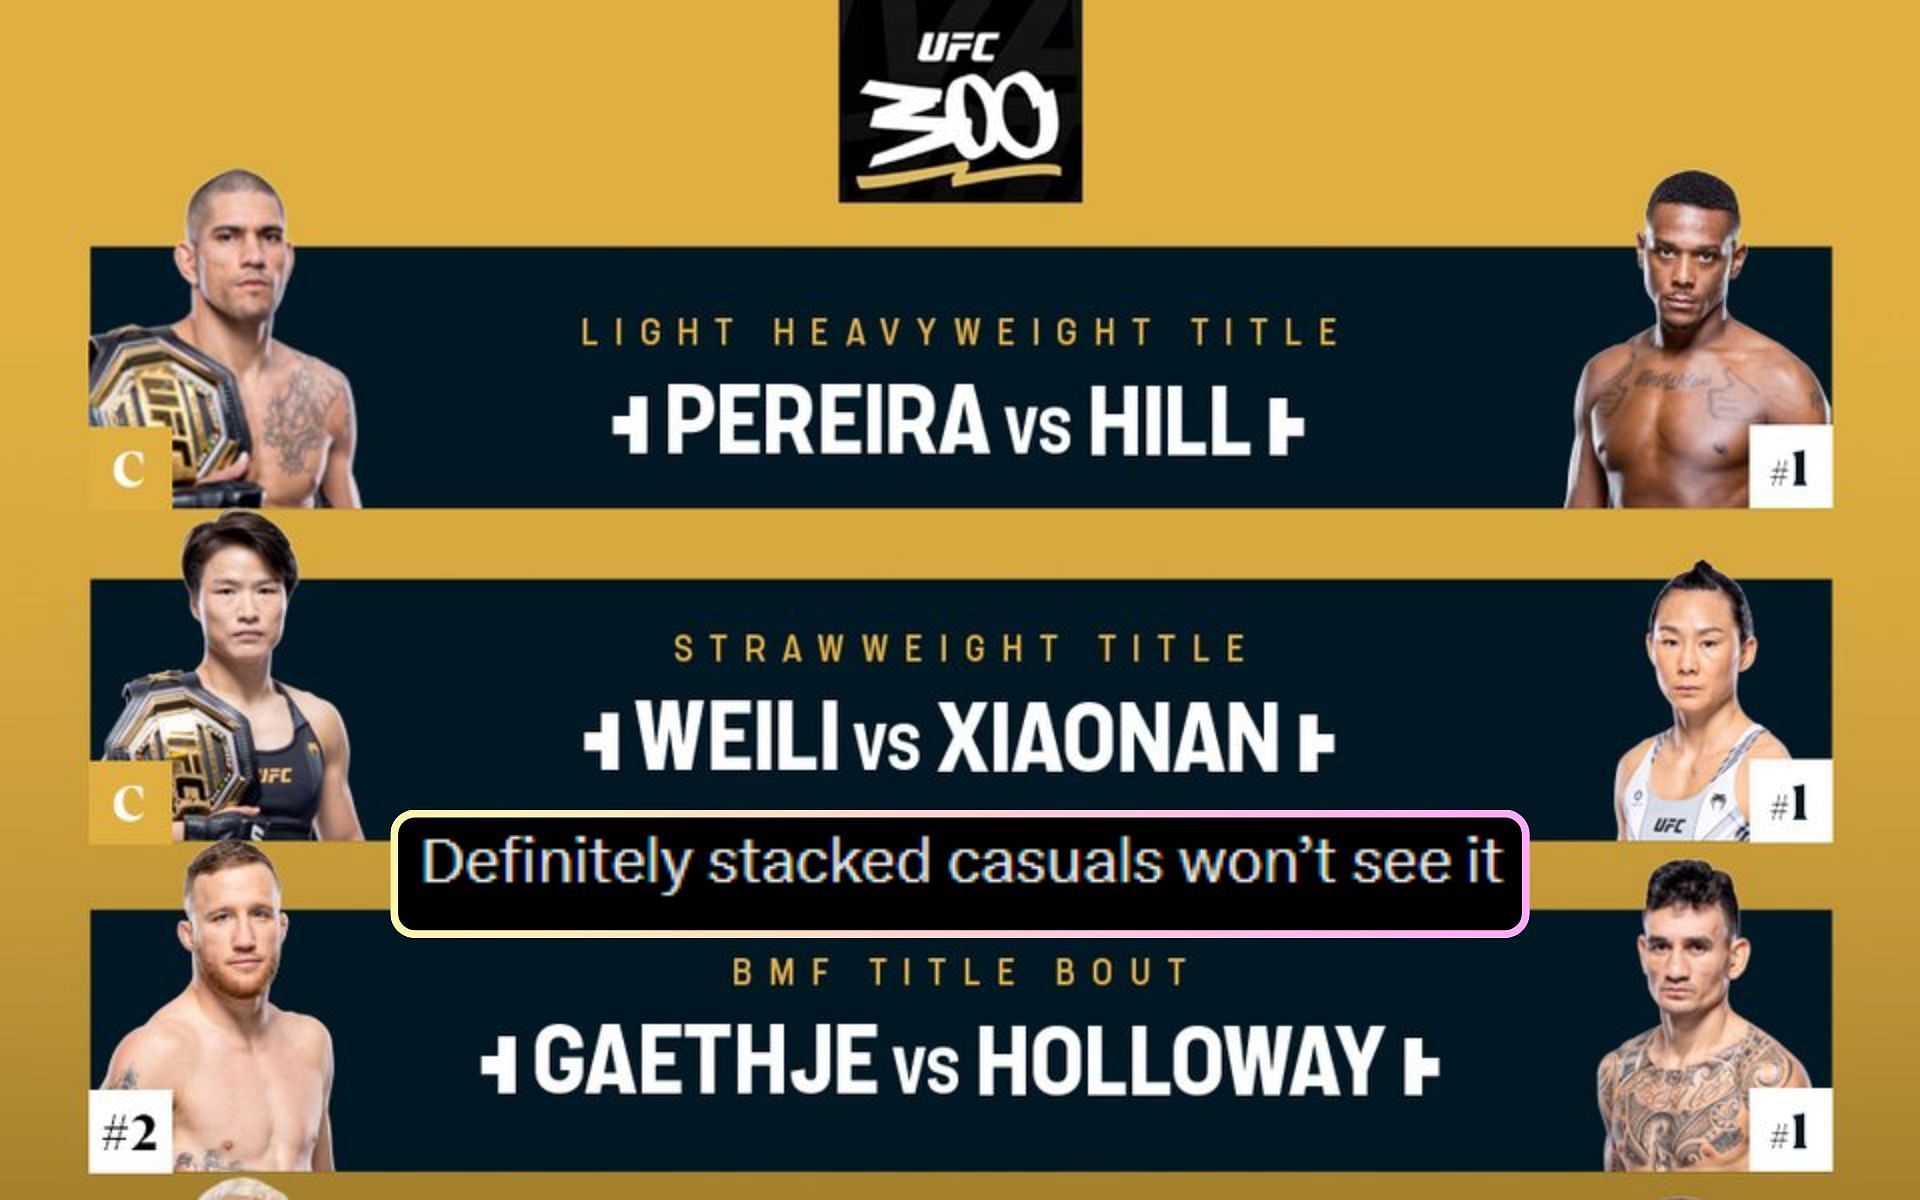 MMA fans gets hyped up with the complete UFC 300 fight card